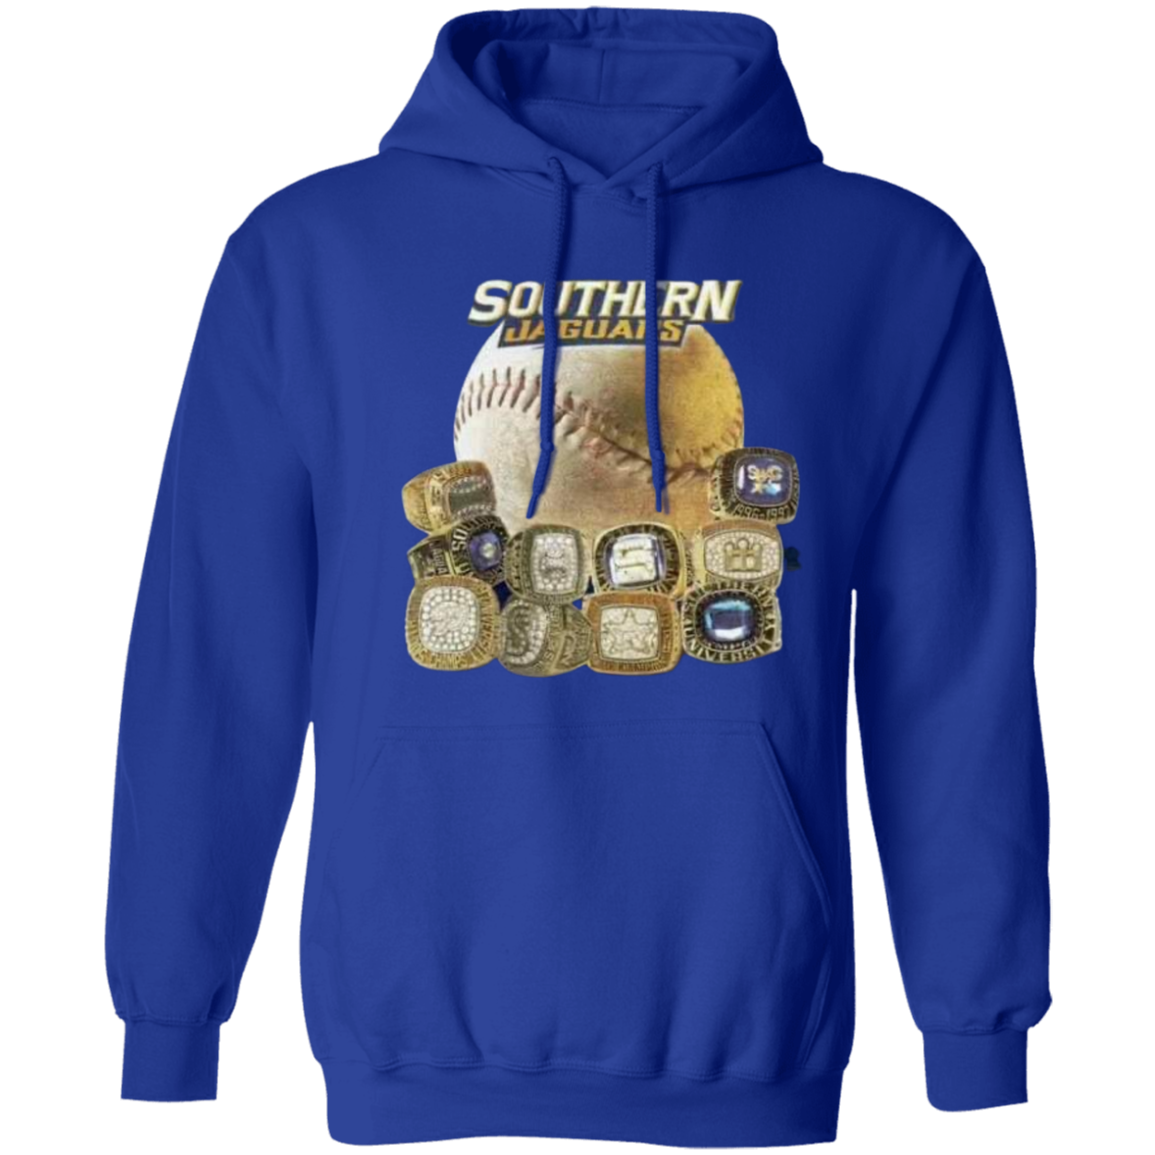 SU Baseball SWAC (Southern Wins Another Championship)  Rings Z66x Pullover Hoodie 8 oz (Closeout)